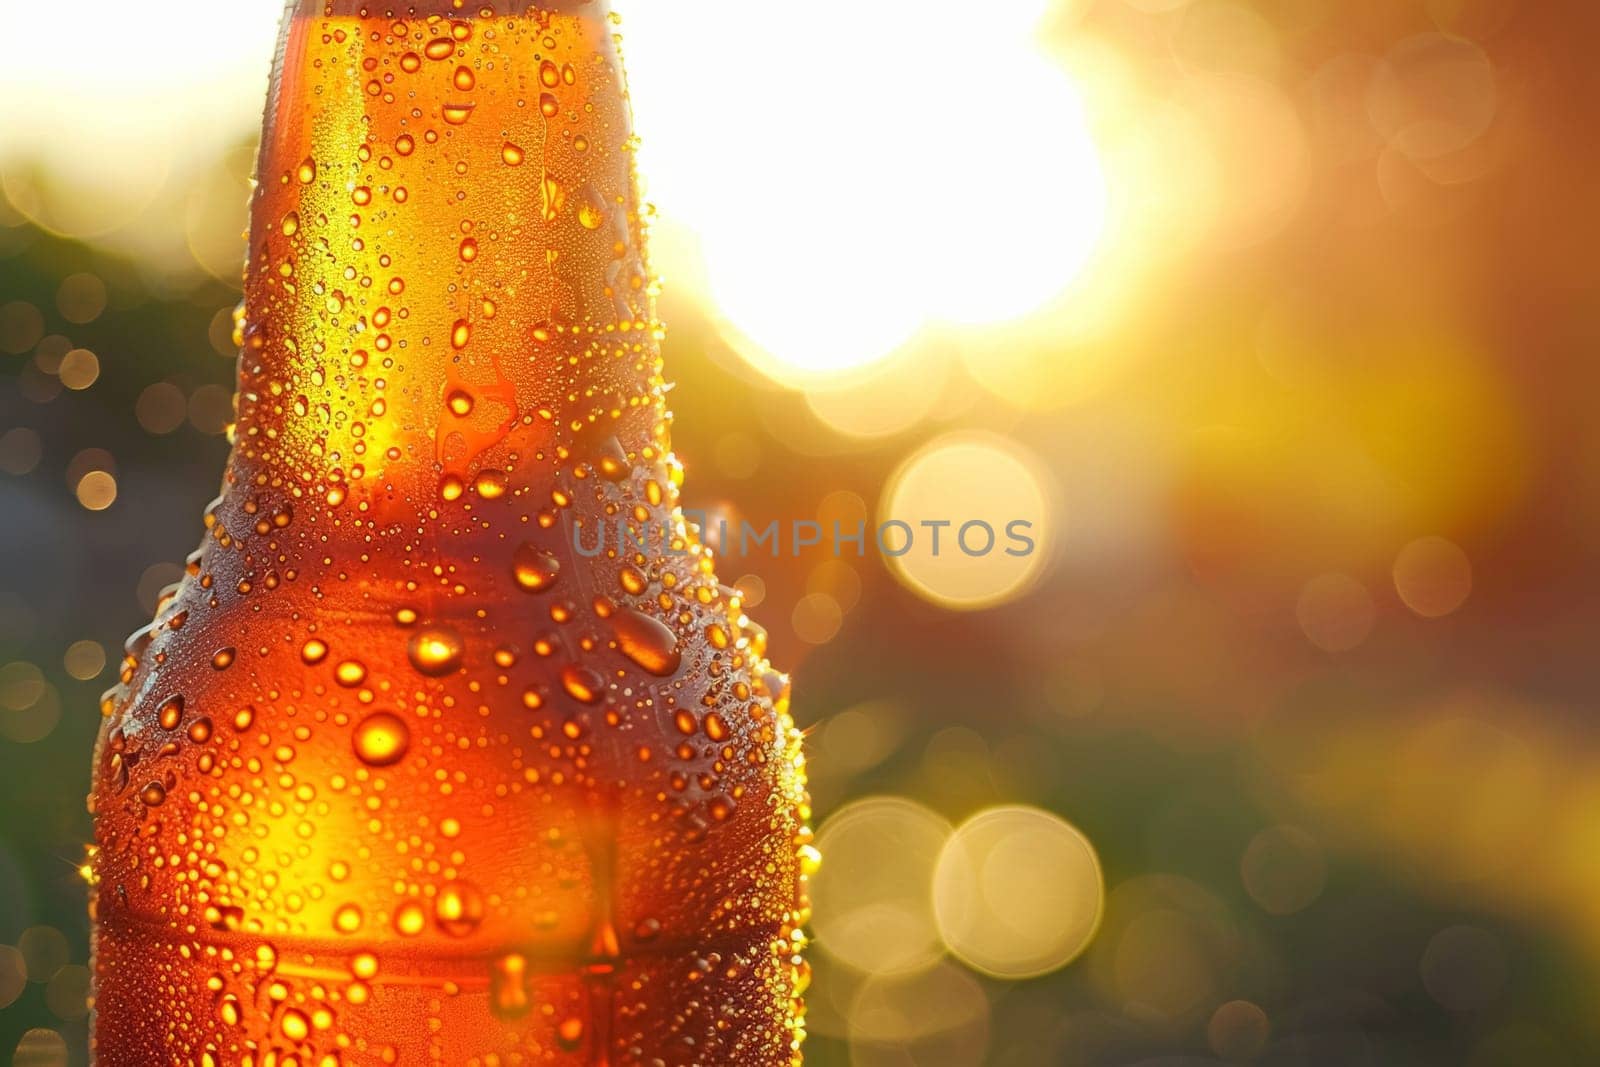 Chilled Beer Bottle Close-up by andreyz